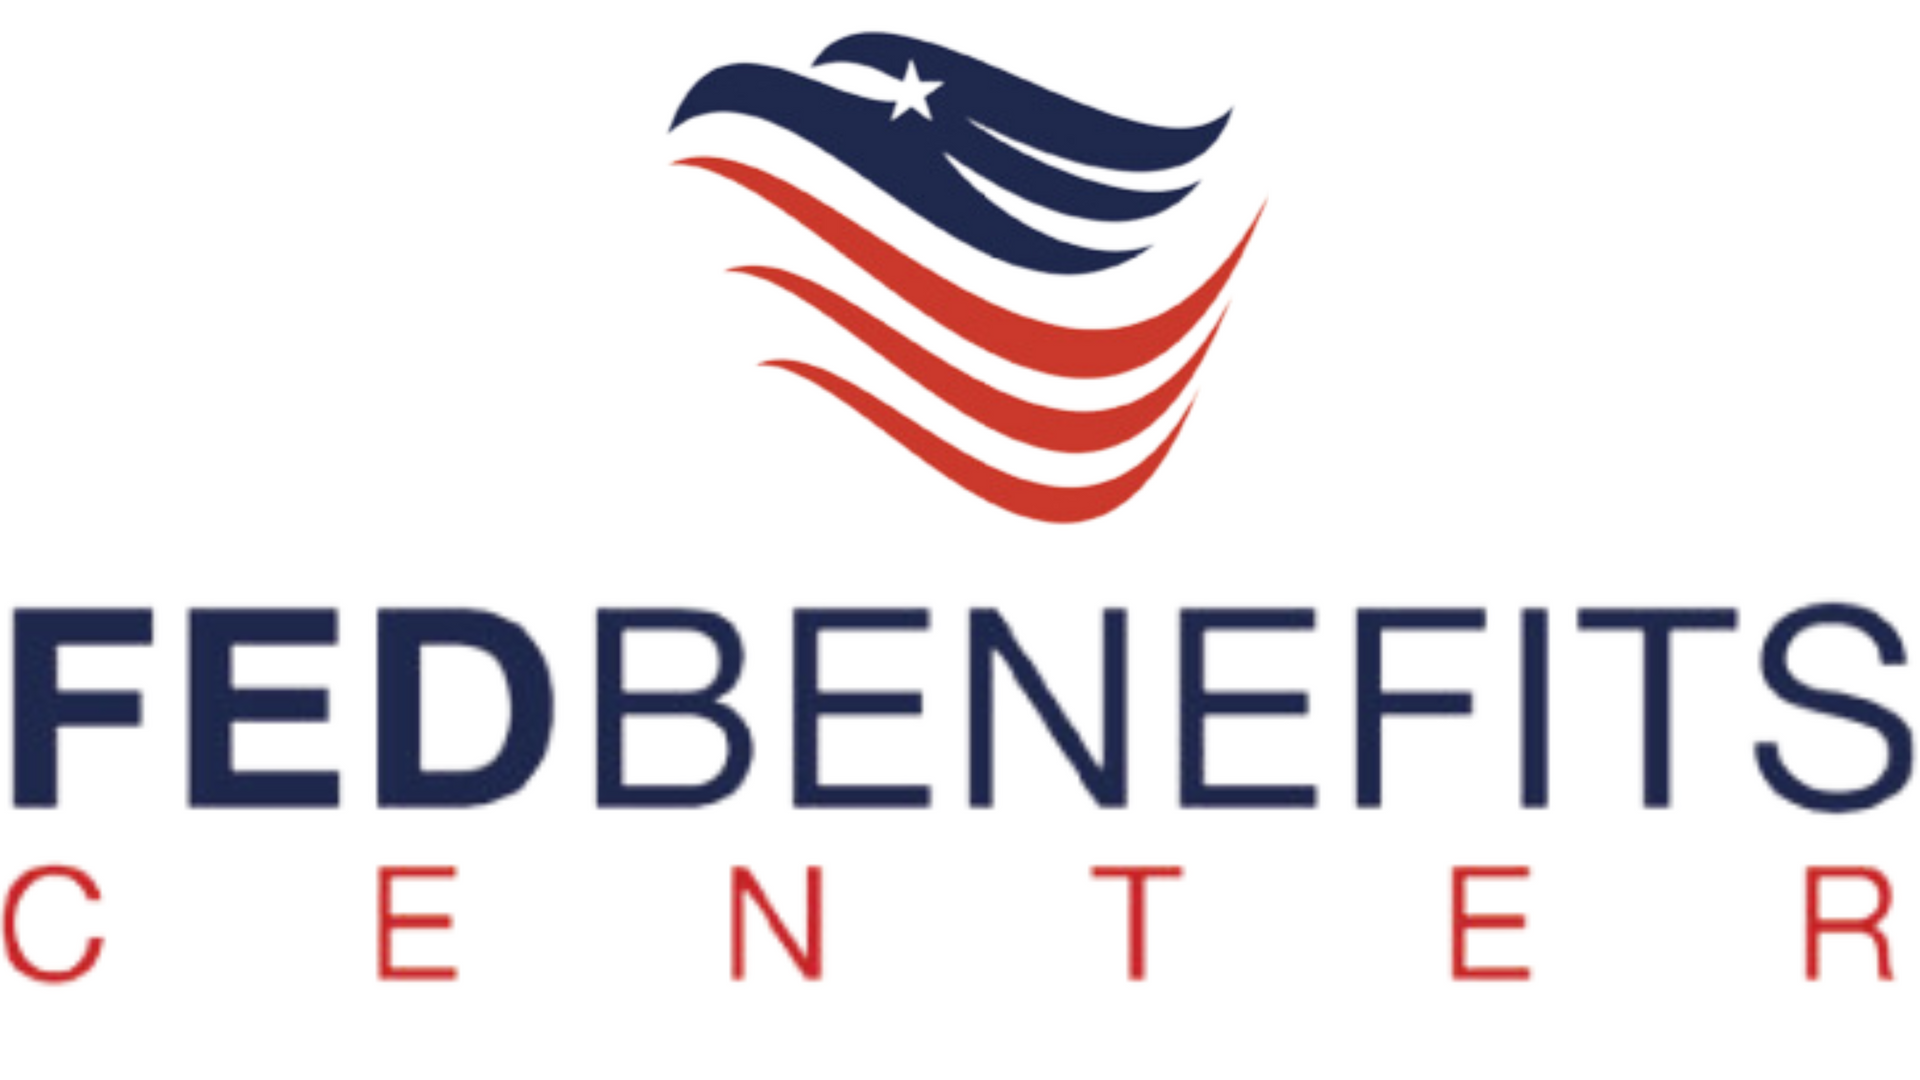 The fed benefits center logo has an american flag on it.